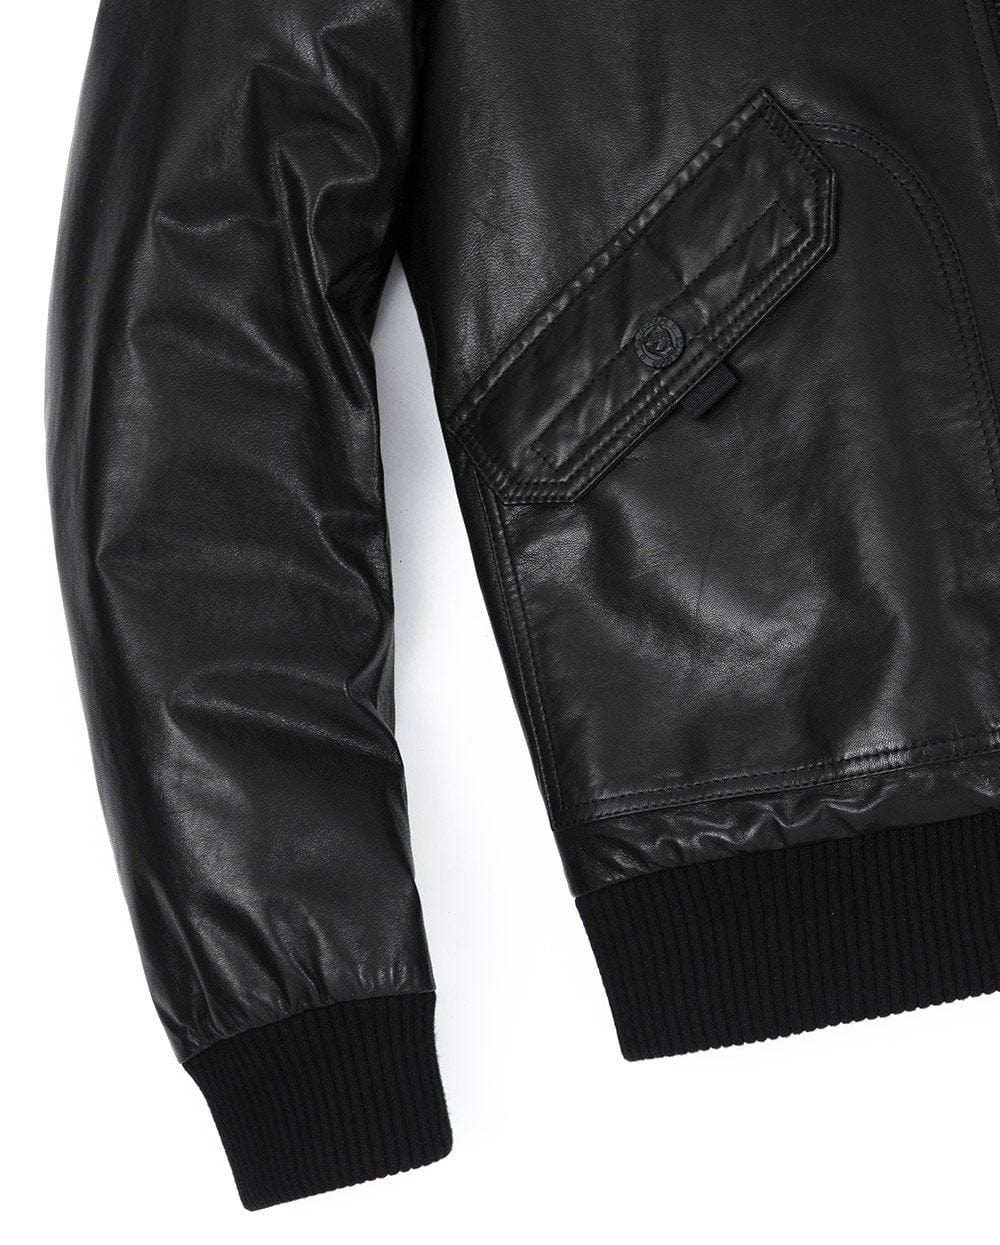 Black 3D Embroidery Patched Genuine Leather Bomber Jacket